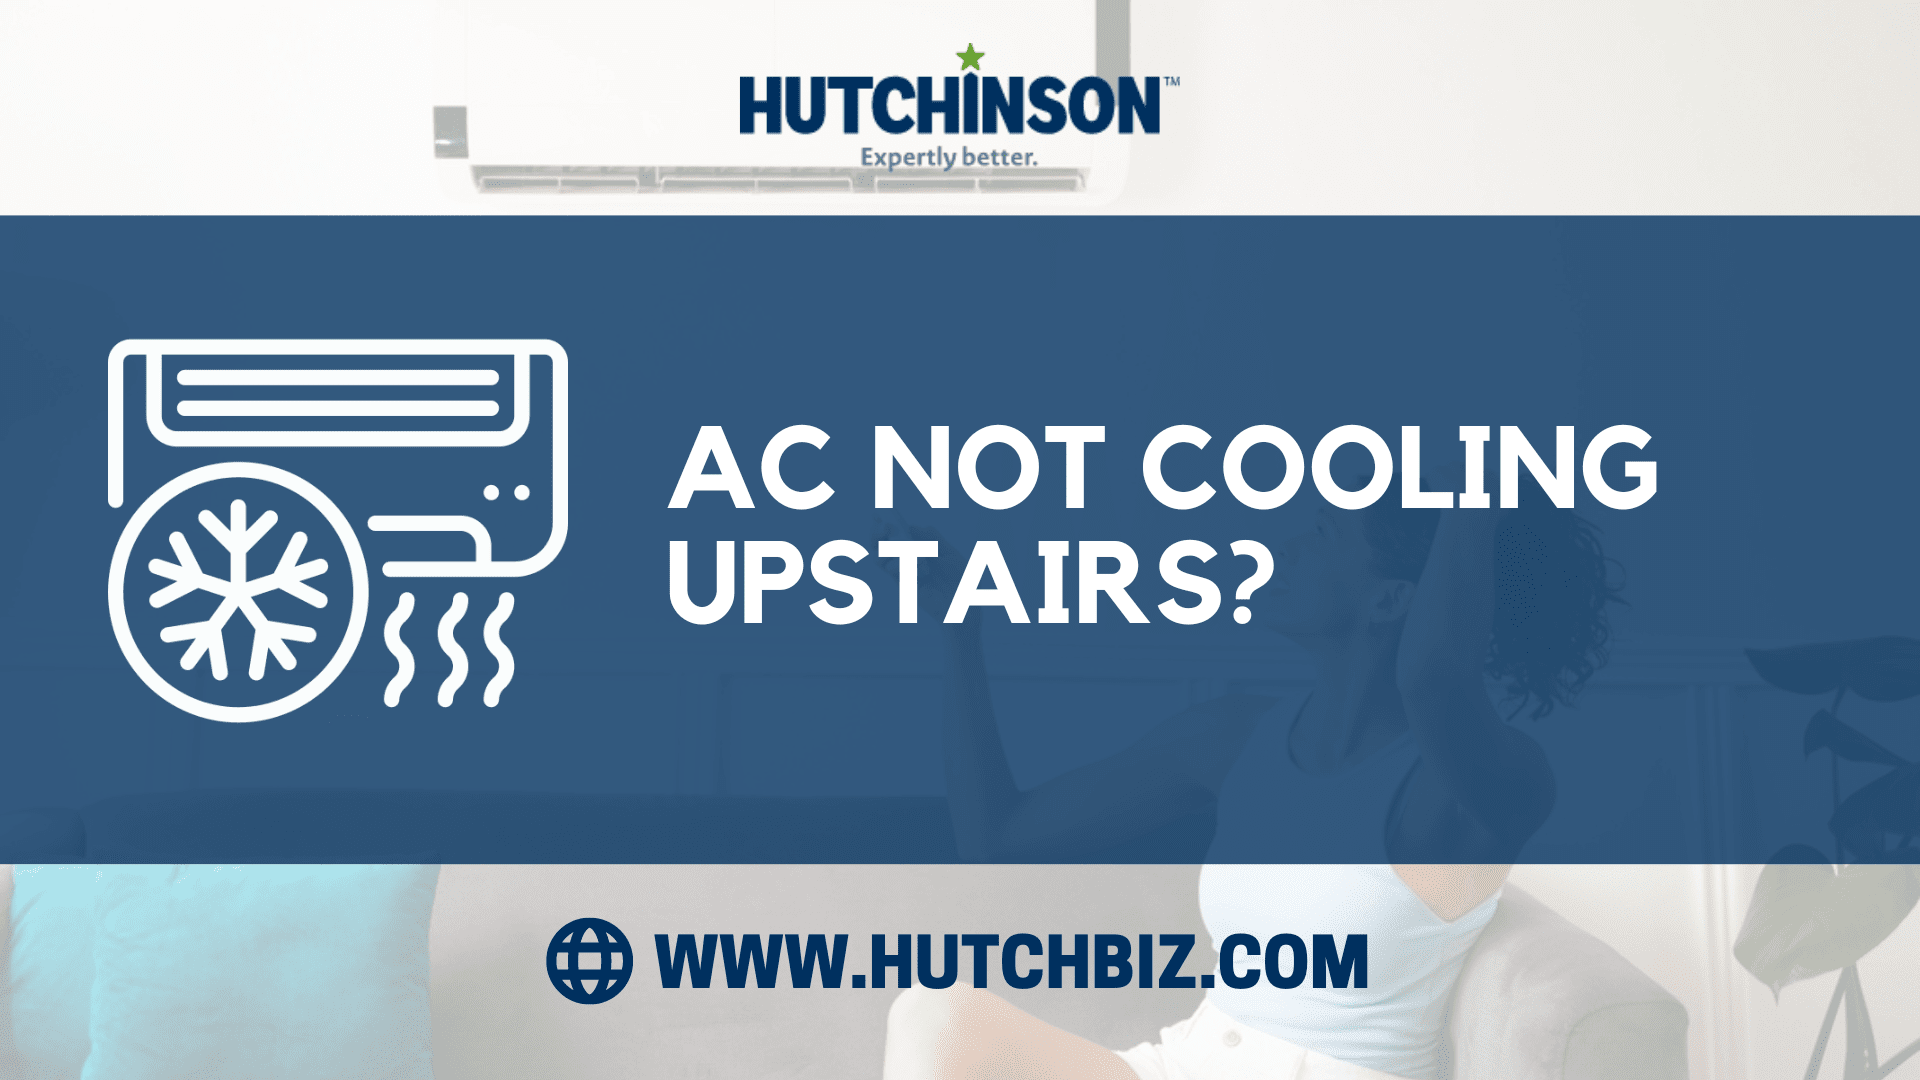 AC Not Cooling Upstairs?